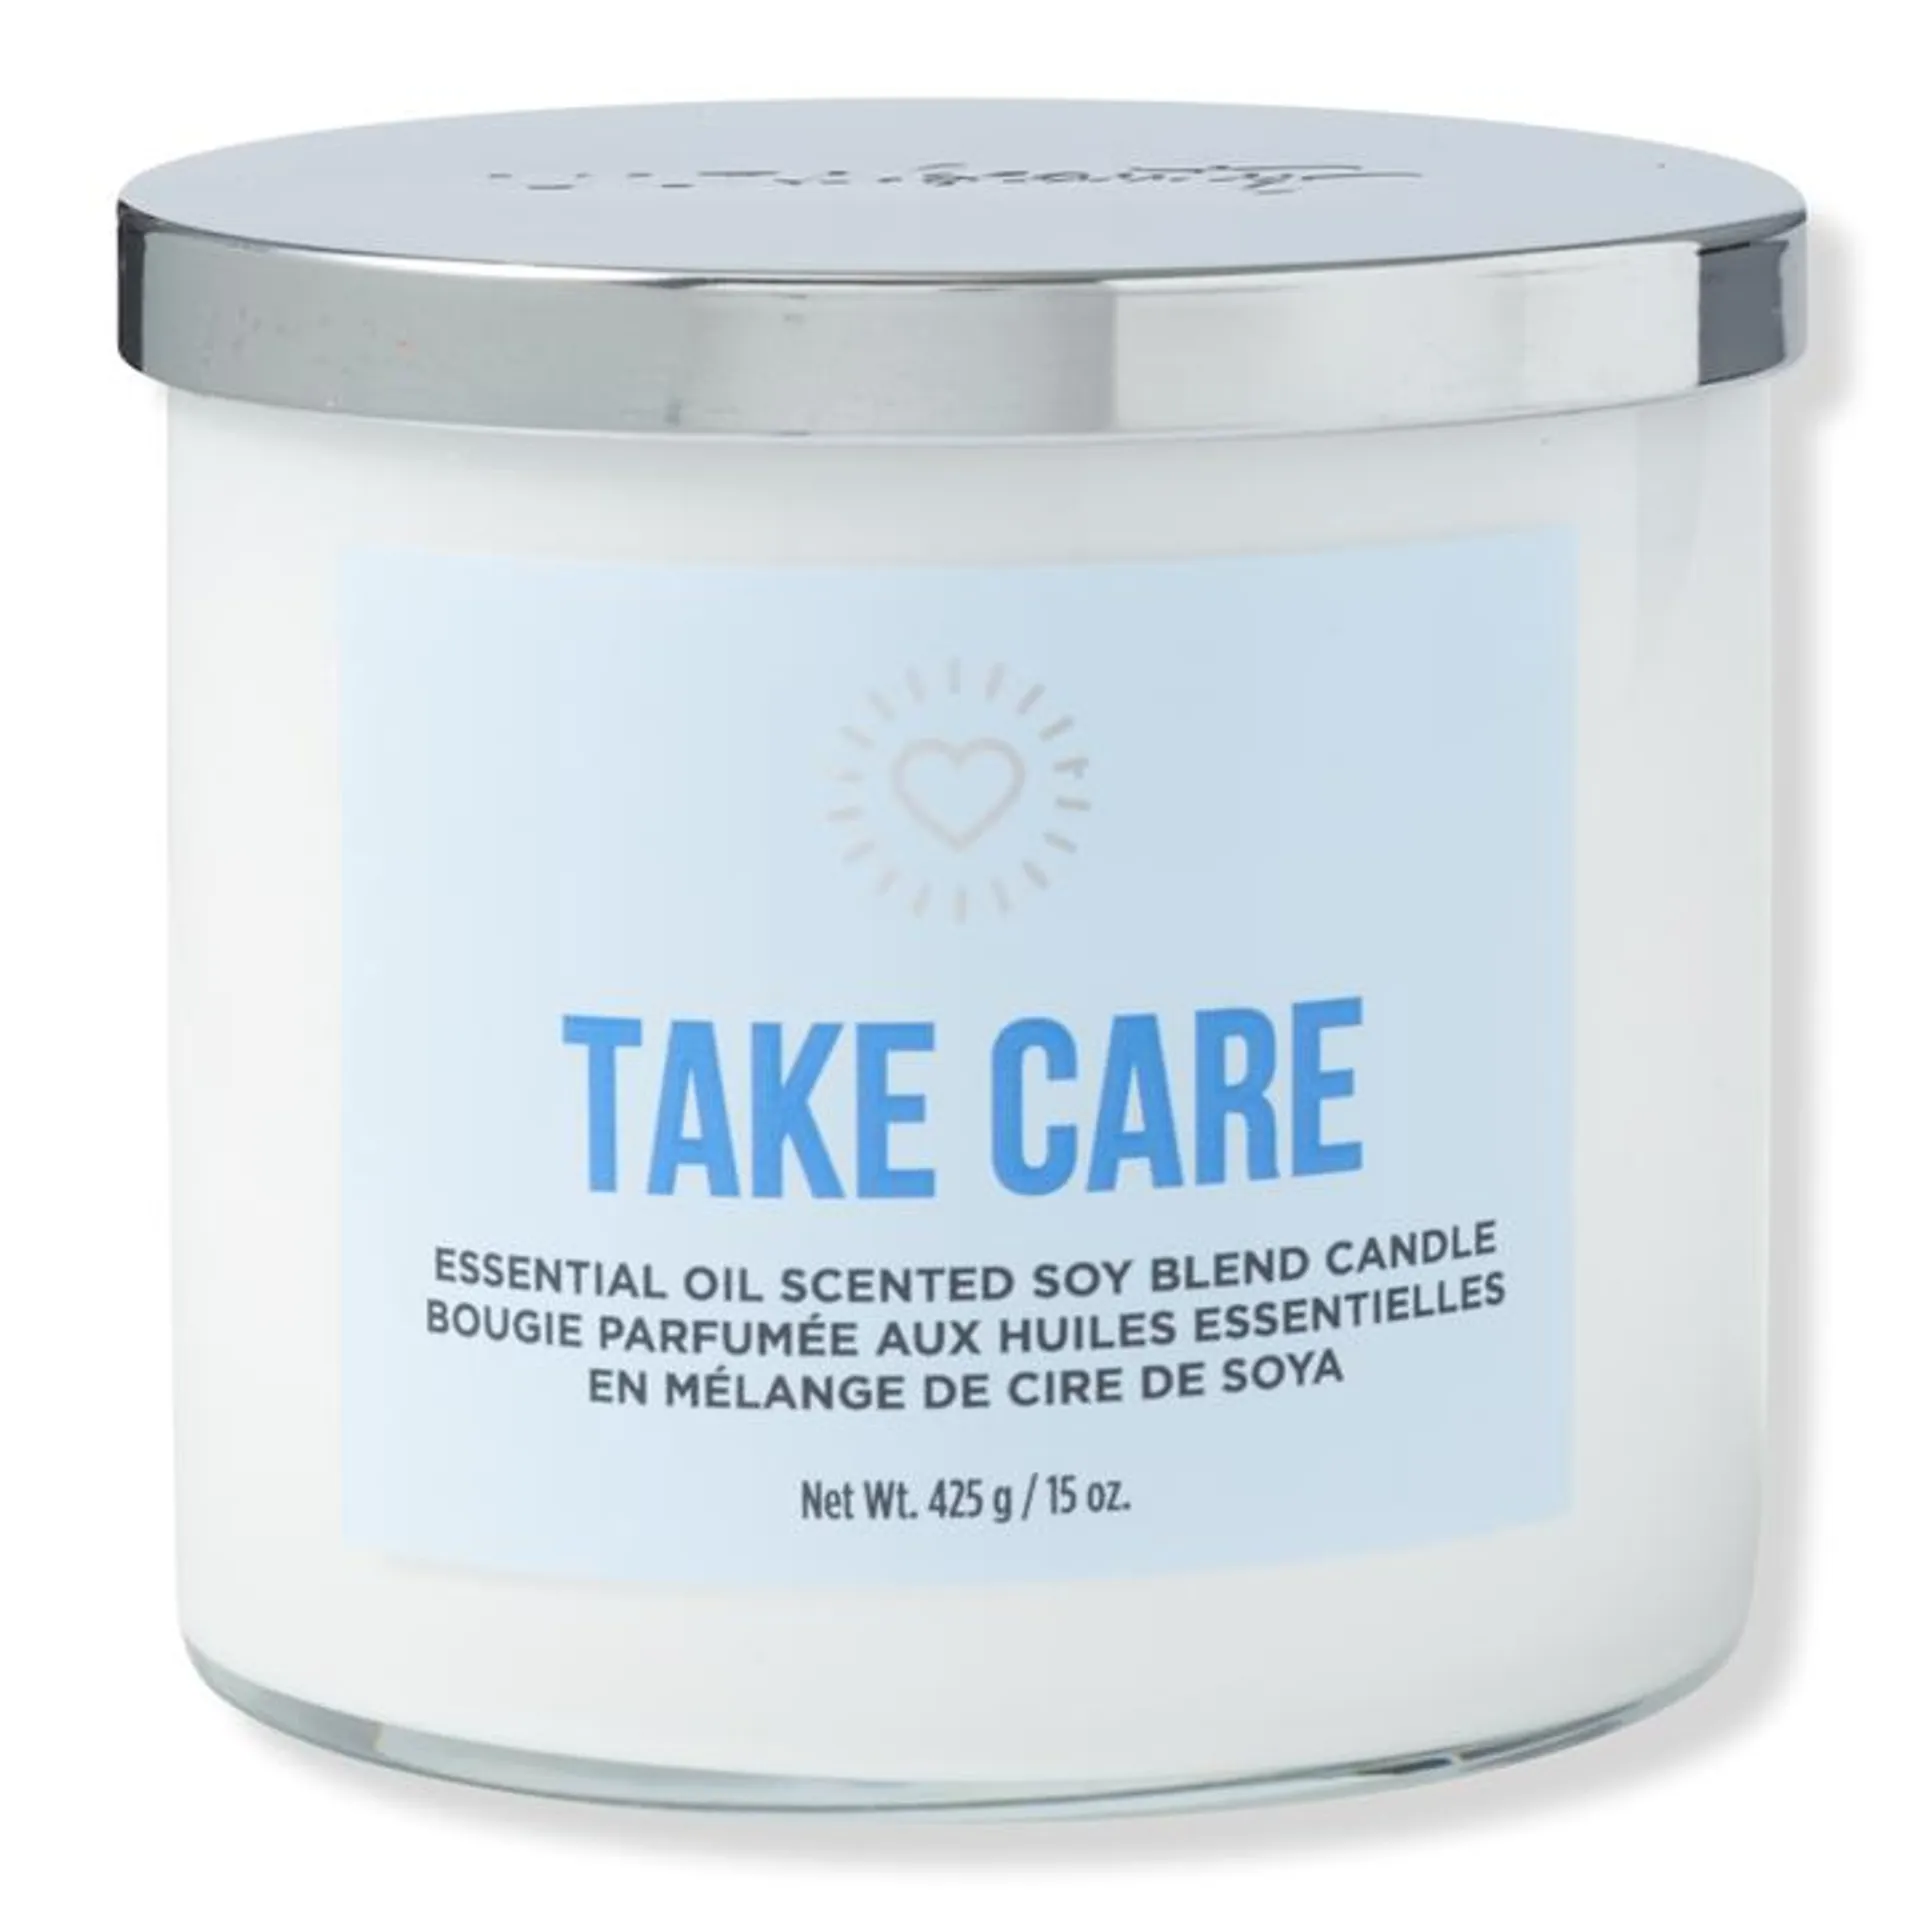 Take Care Scented Soy Blend Candle